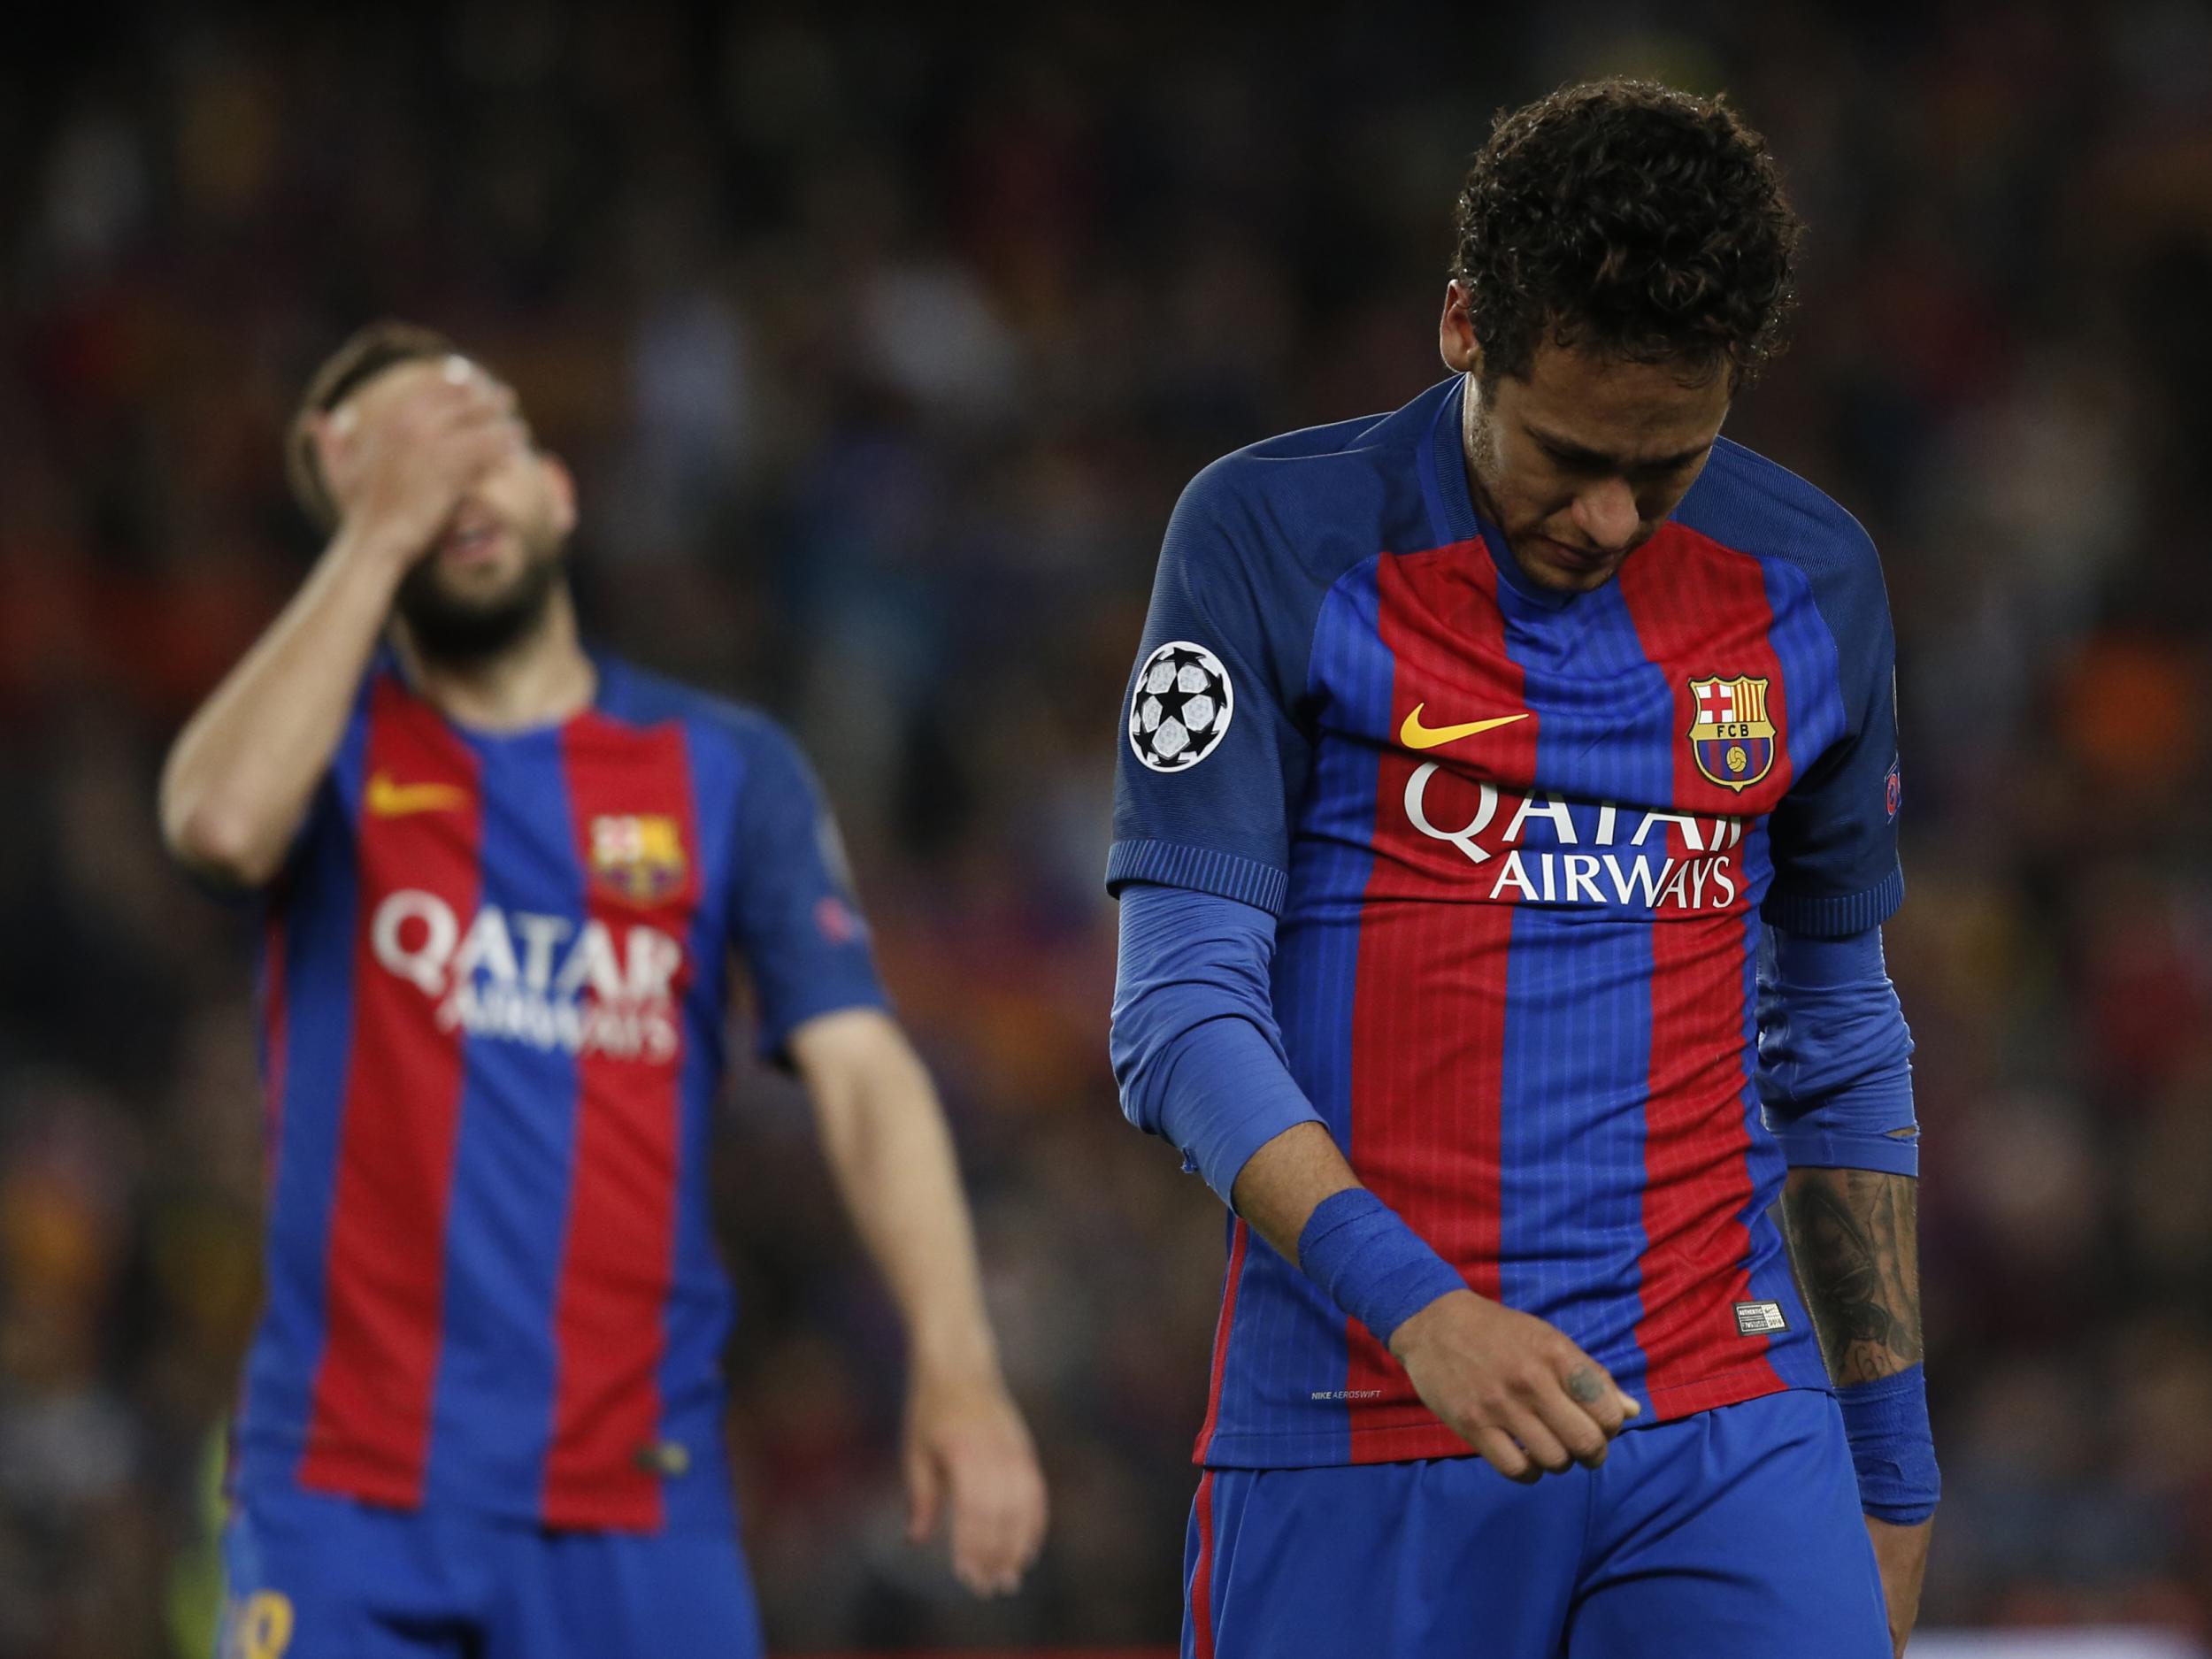 Barcelona now look very unlikely to win the title